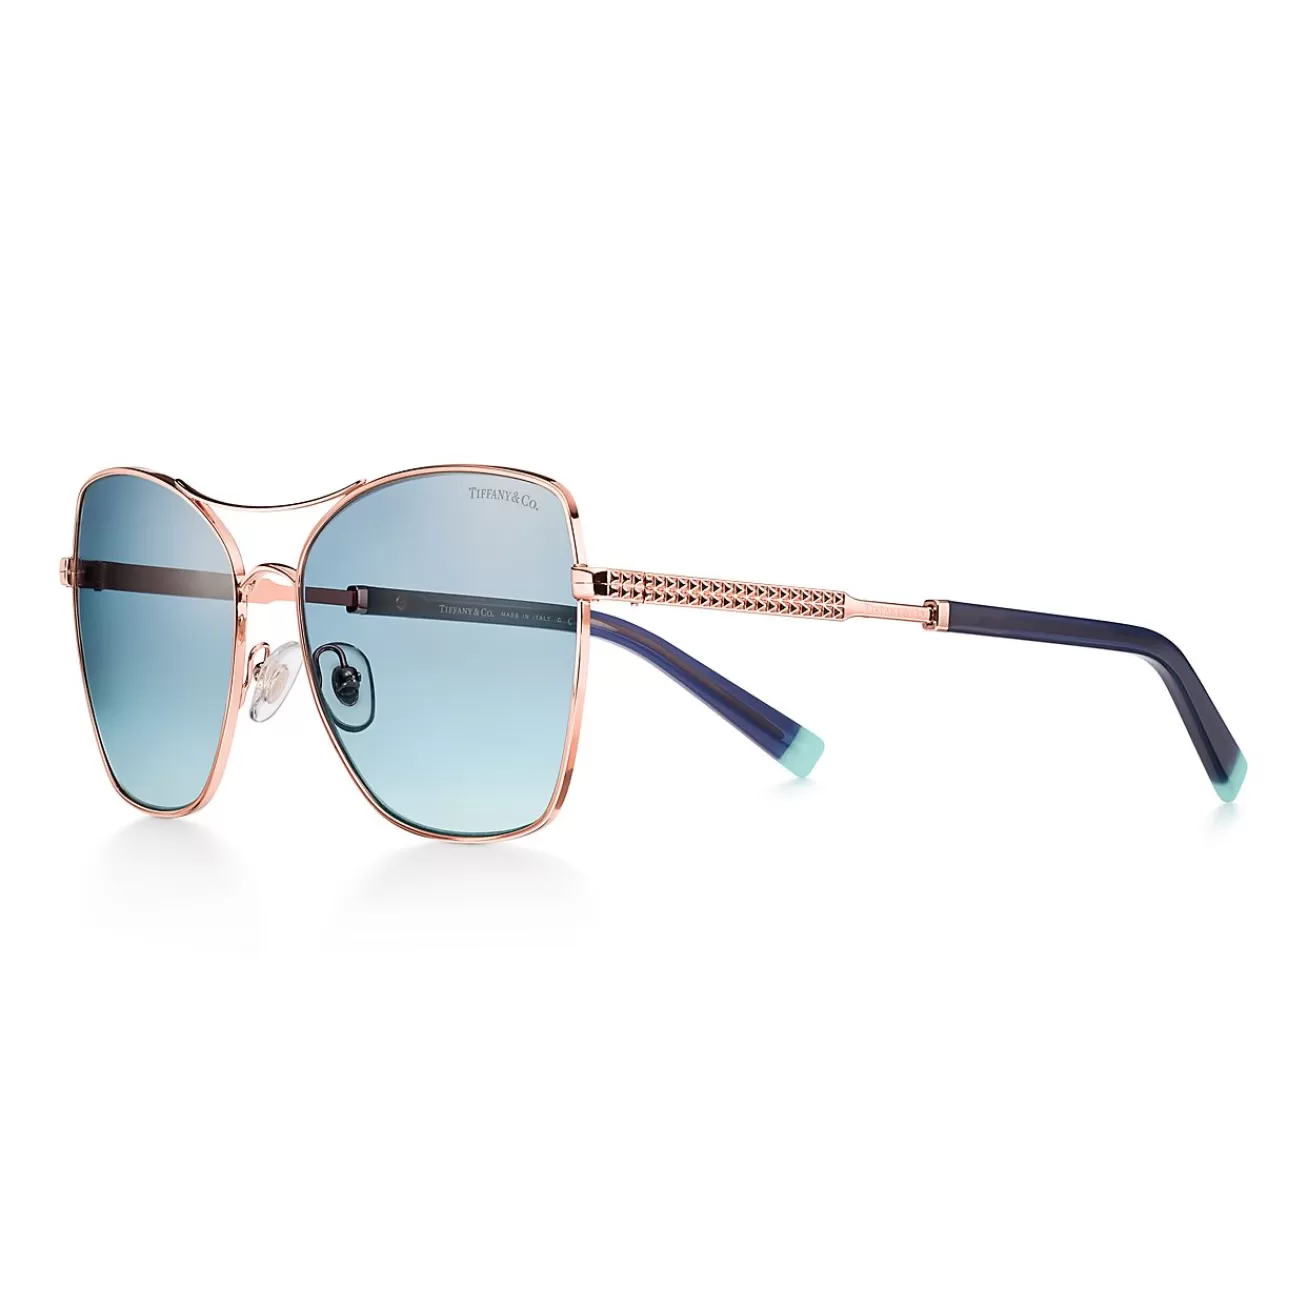 Tiffany & Co. Diamond Point Sunglasses in Rose Gold-colored Metal with Brown and Blue Lenses | ^ Sunglasses